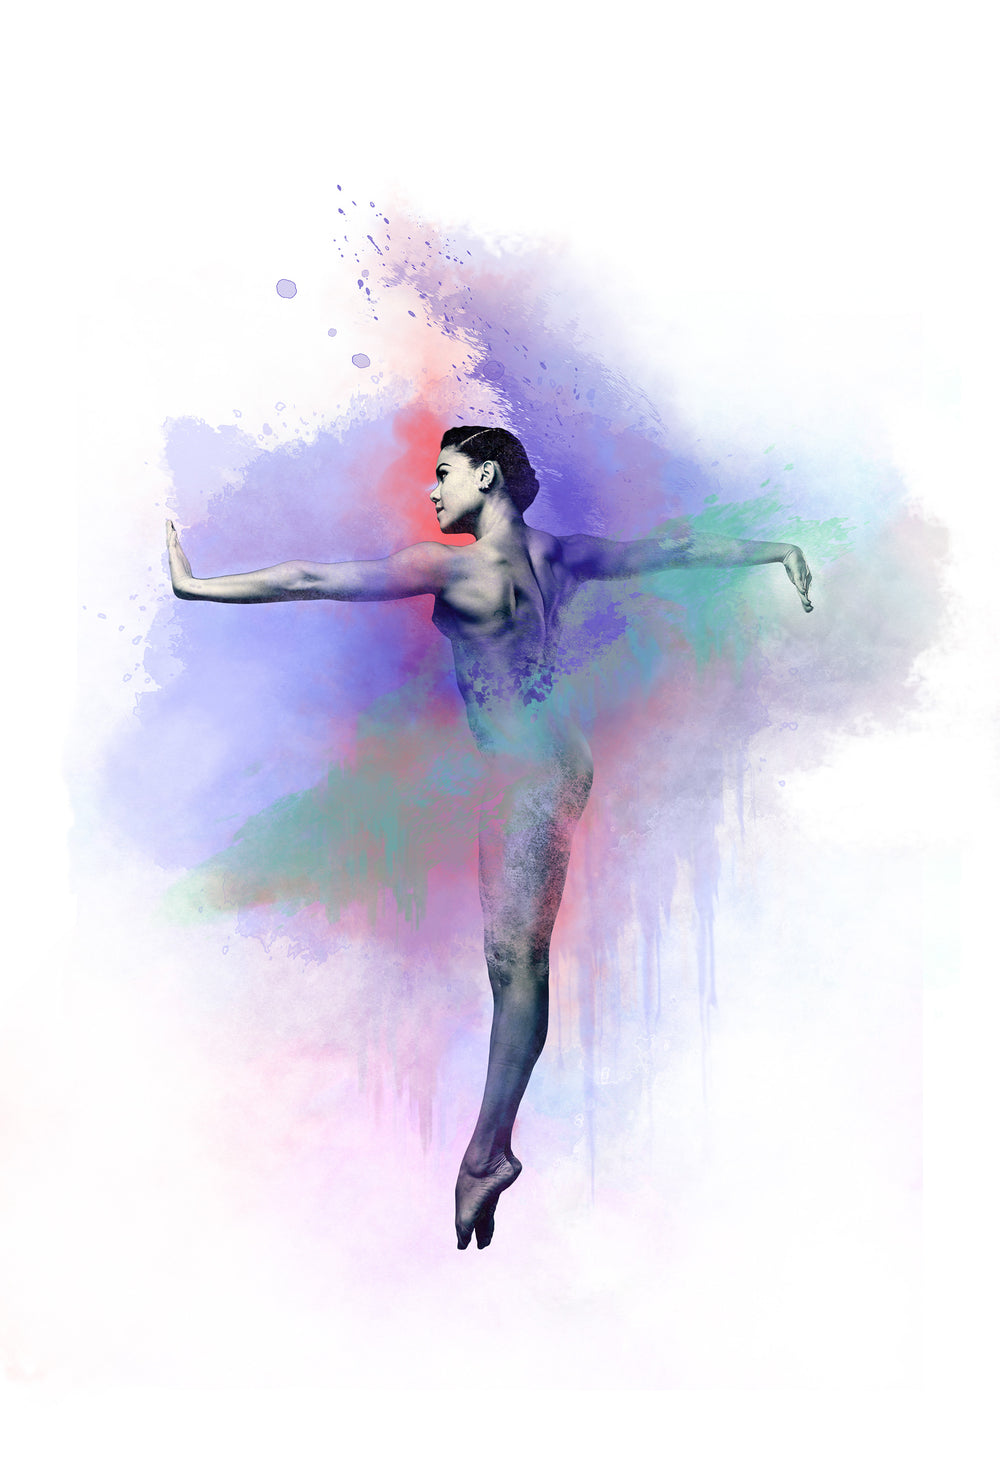 Art Dance Photography Prints - Purchase Online the artwork: Synthesis Ballerina by David Perkins